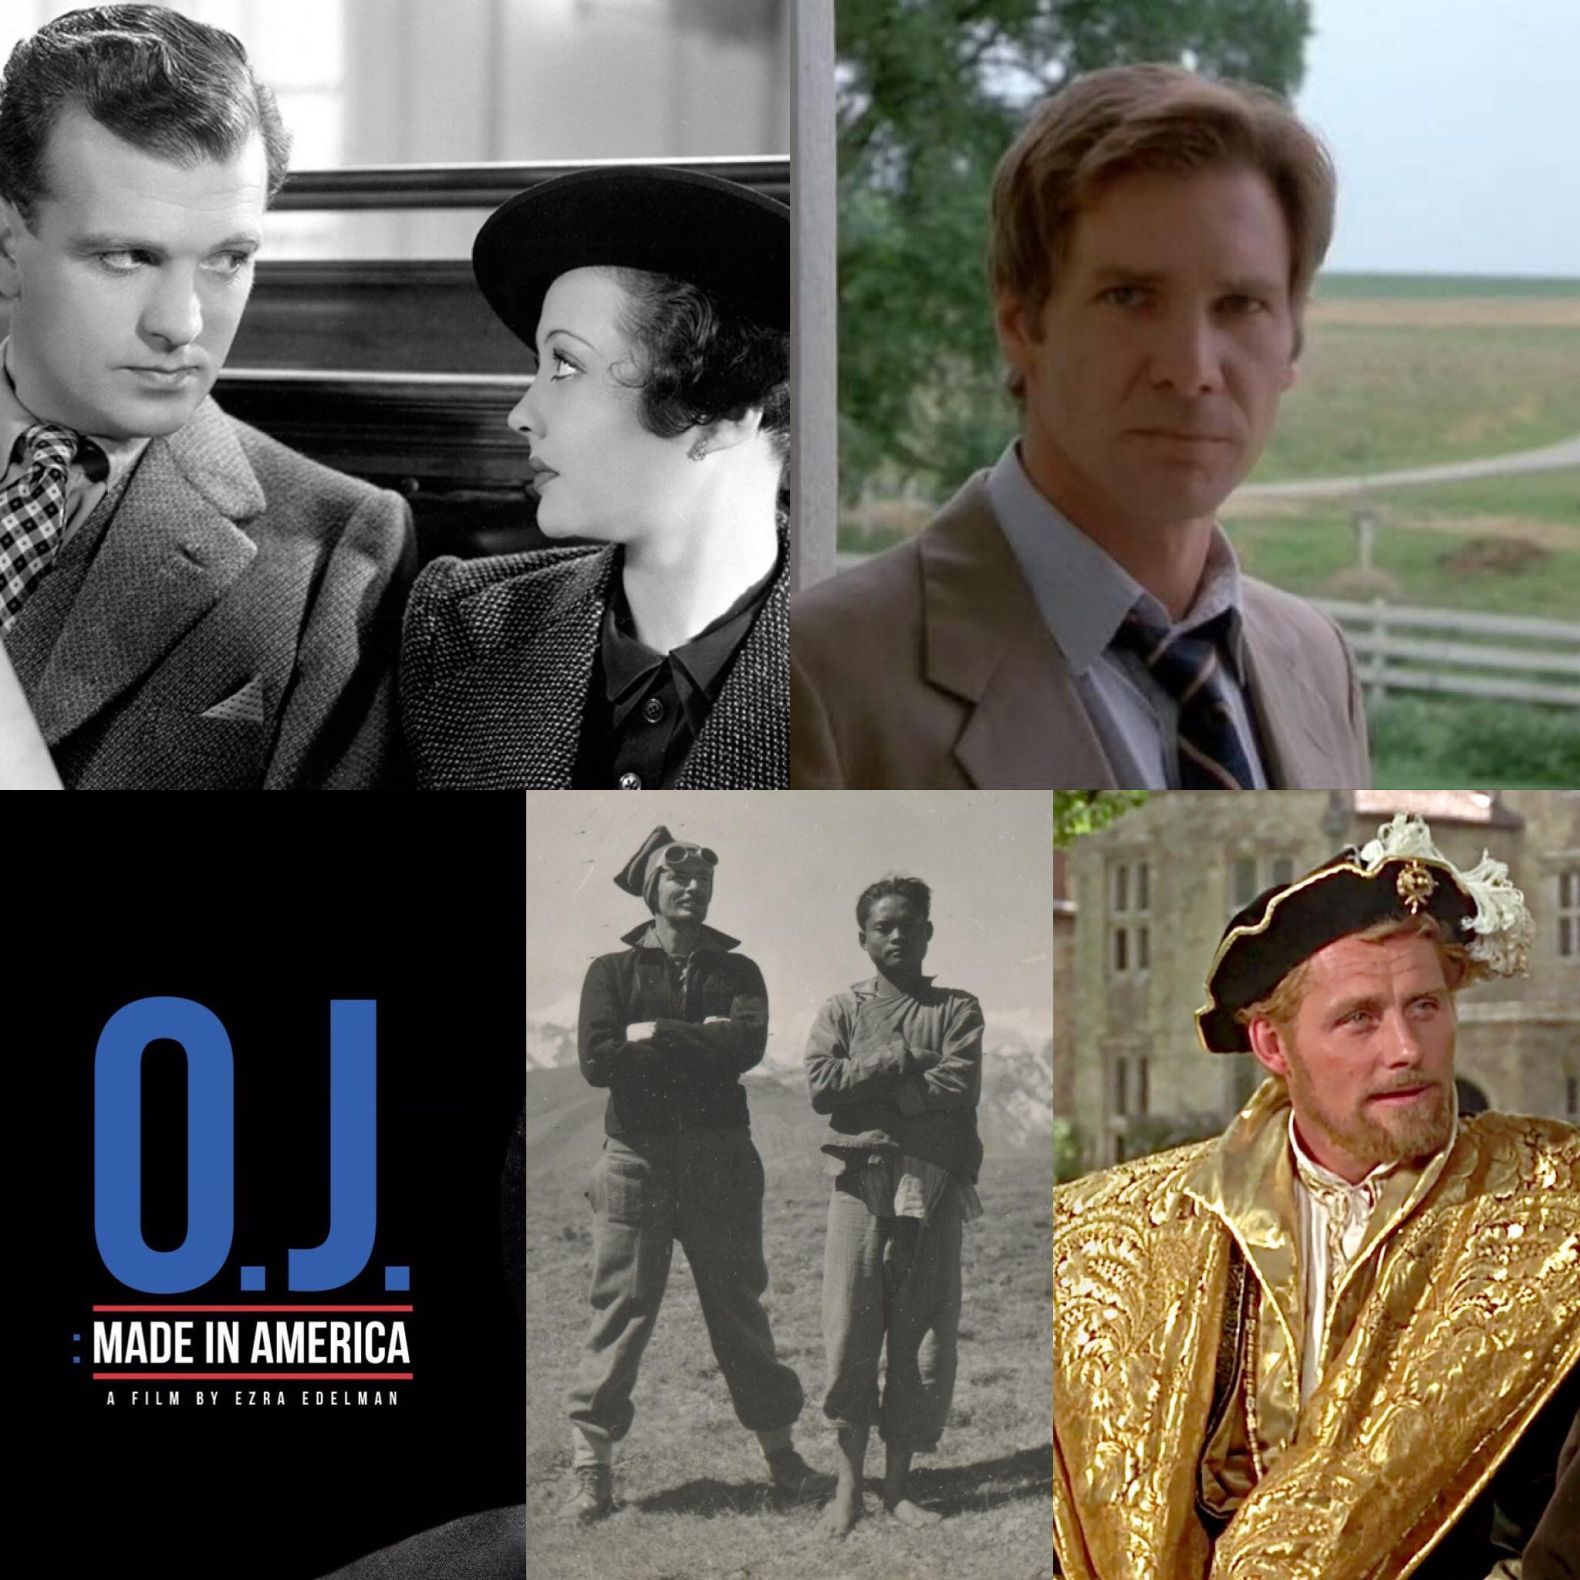 Duke Box #1: Our Guide to the Best Films on TV